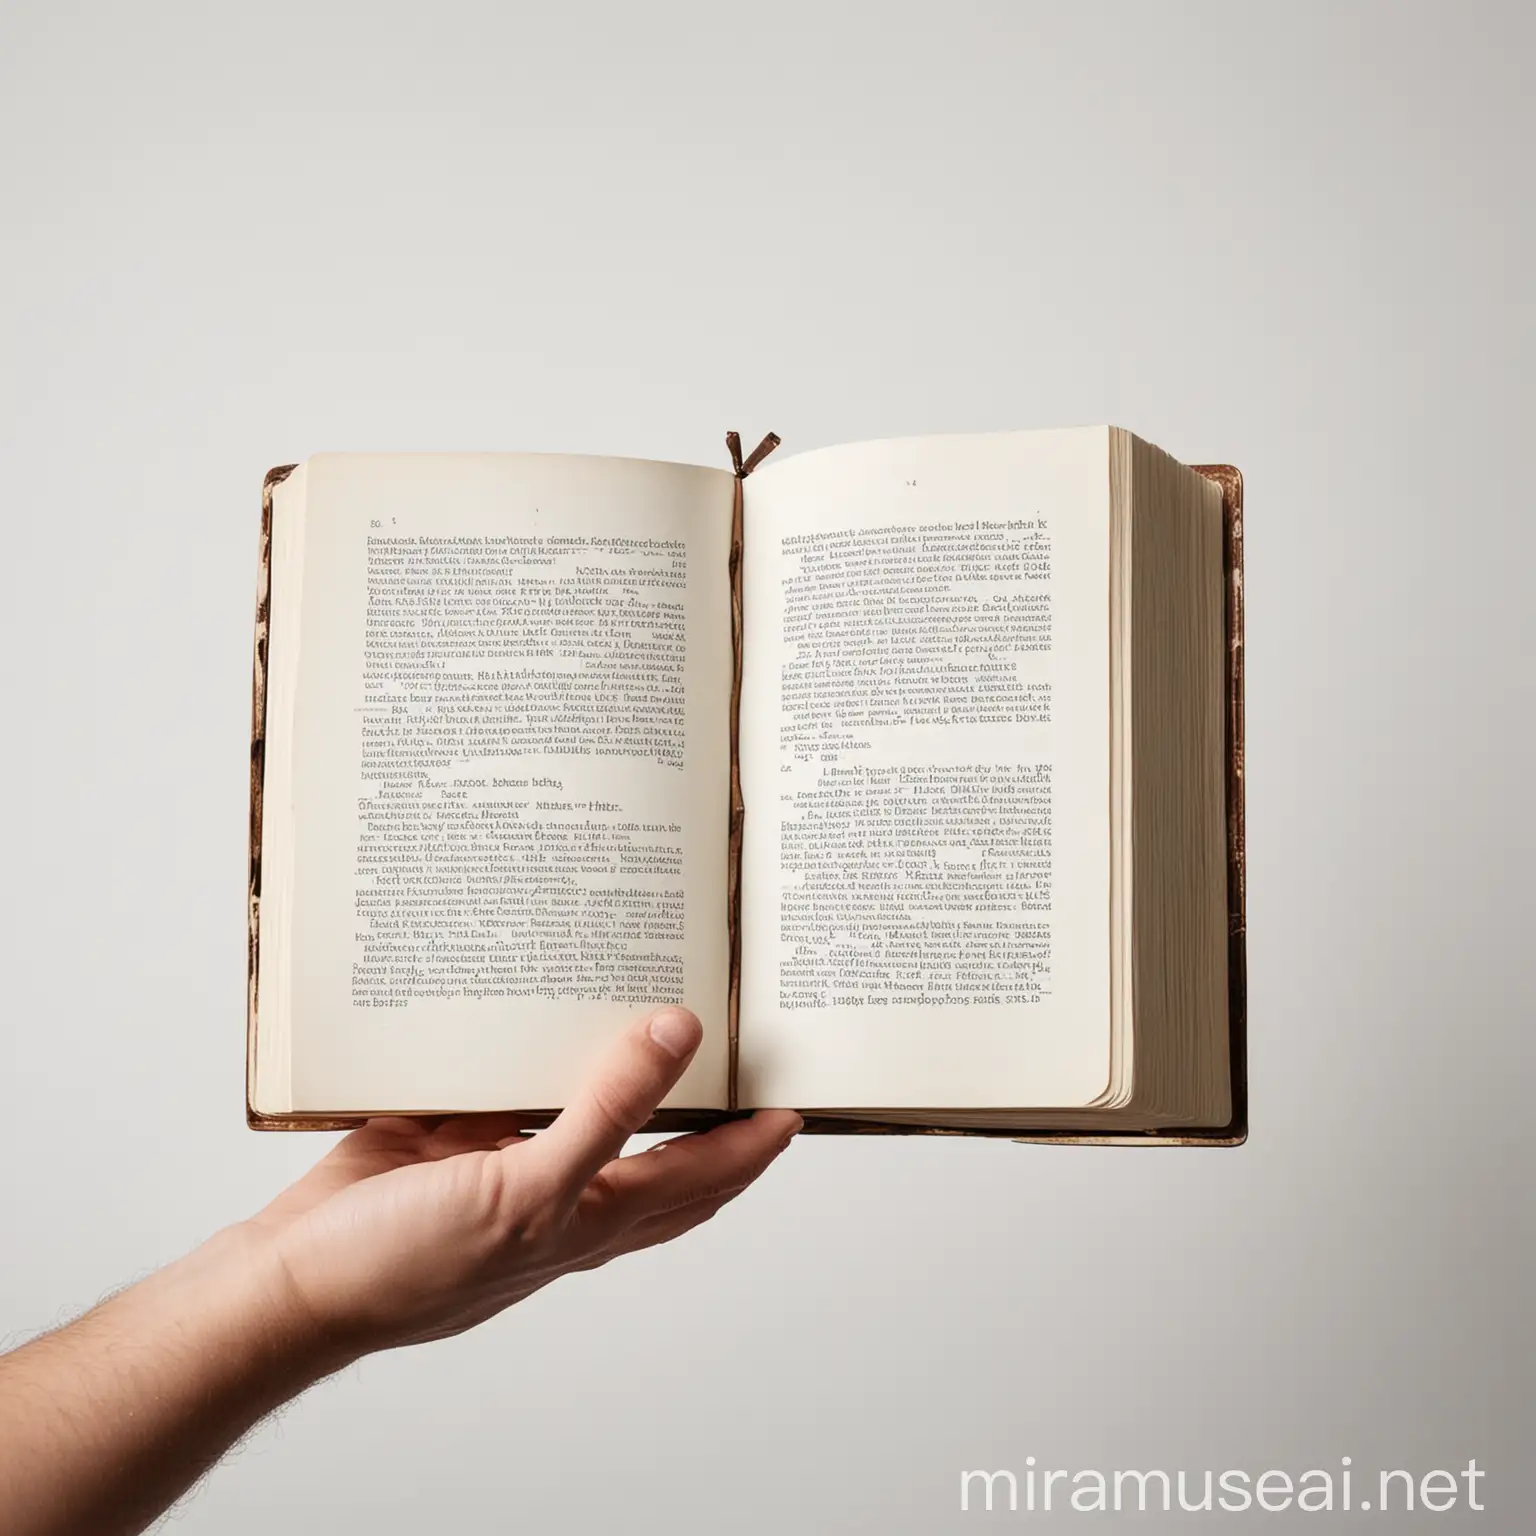 A hand with a book in a white background.